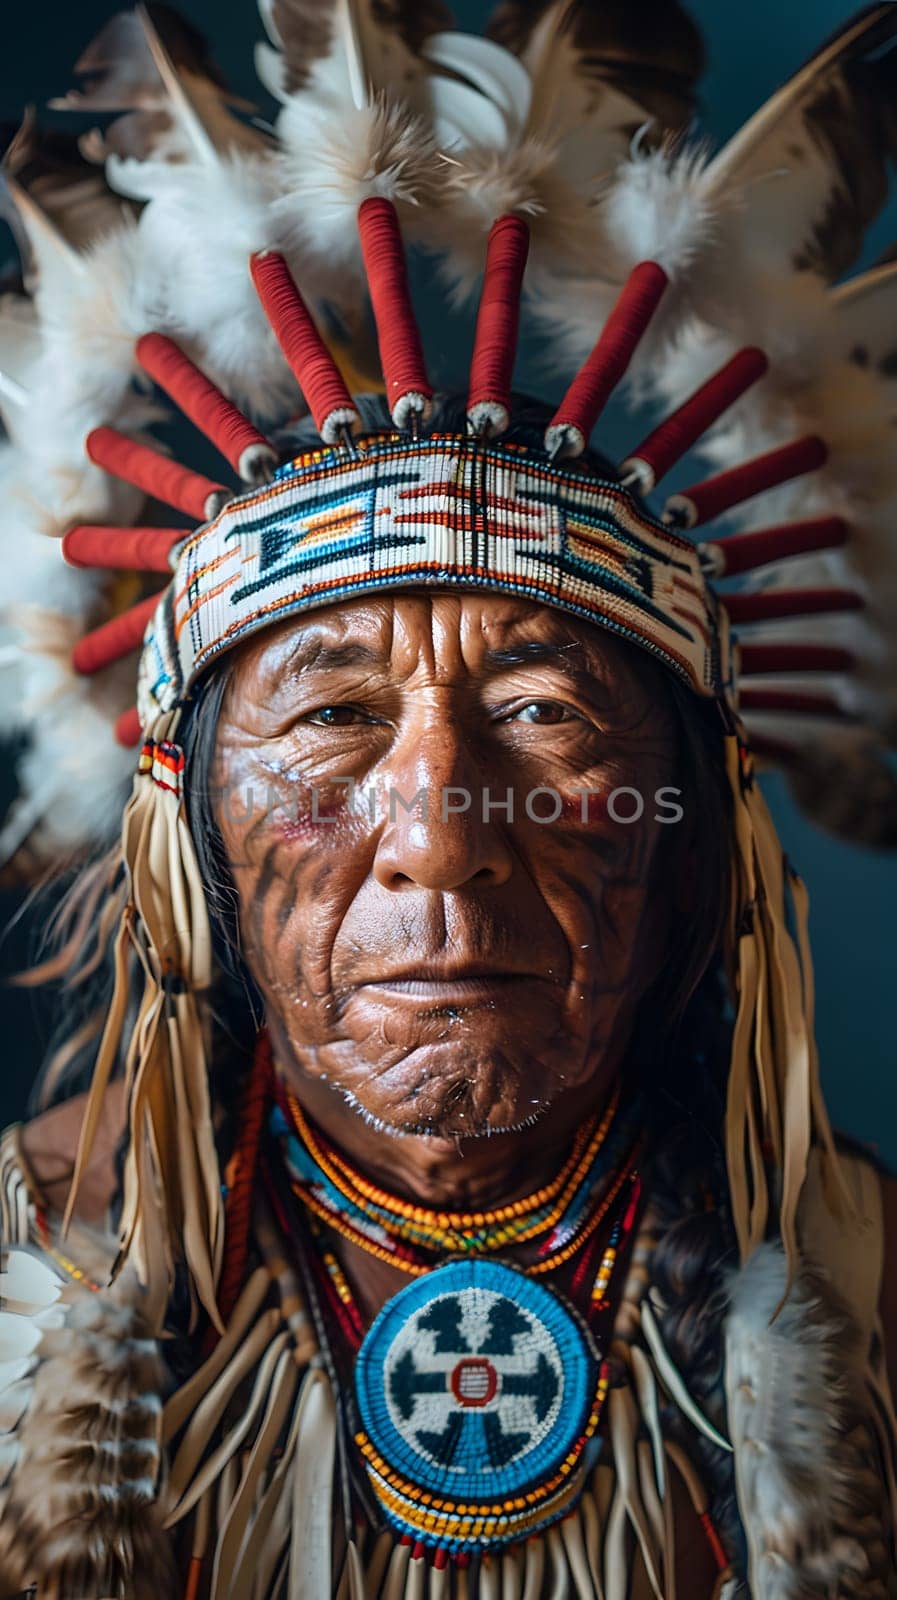 A close up of a human eye peeking through an electric blue native american headdress, showcasing the intricate artistry and tradition of tribal chiefs